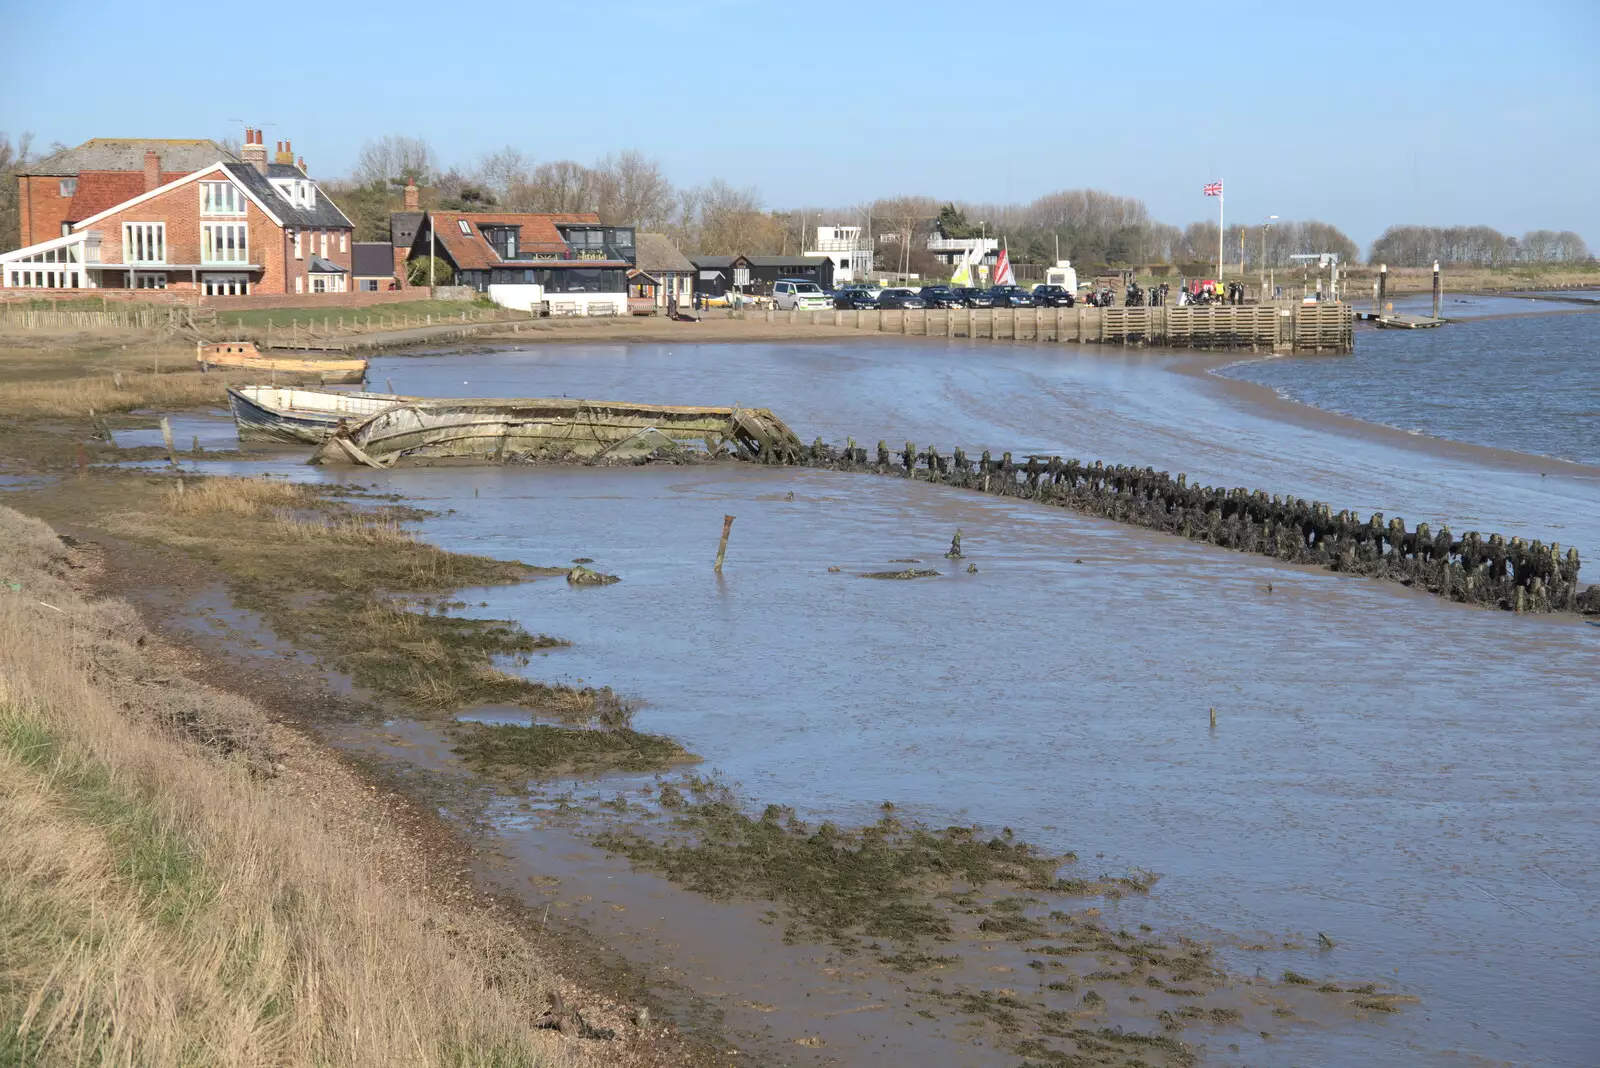 Looking back at Orford Quay, from A Trip to Orford Castle, Orford, Suffolk - 26th February 2022